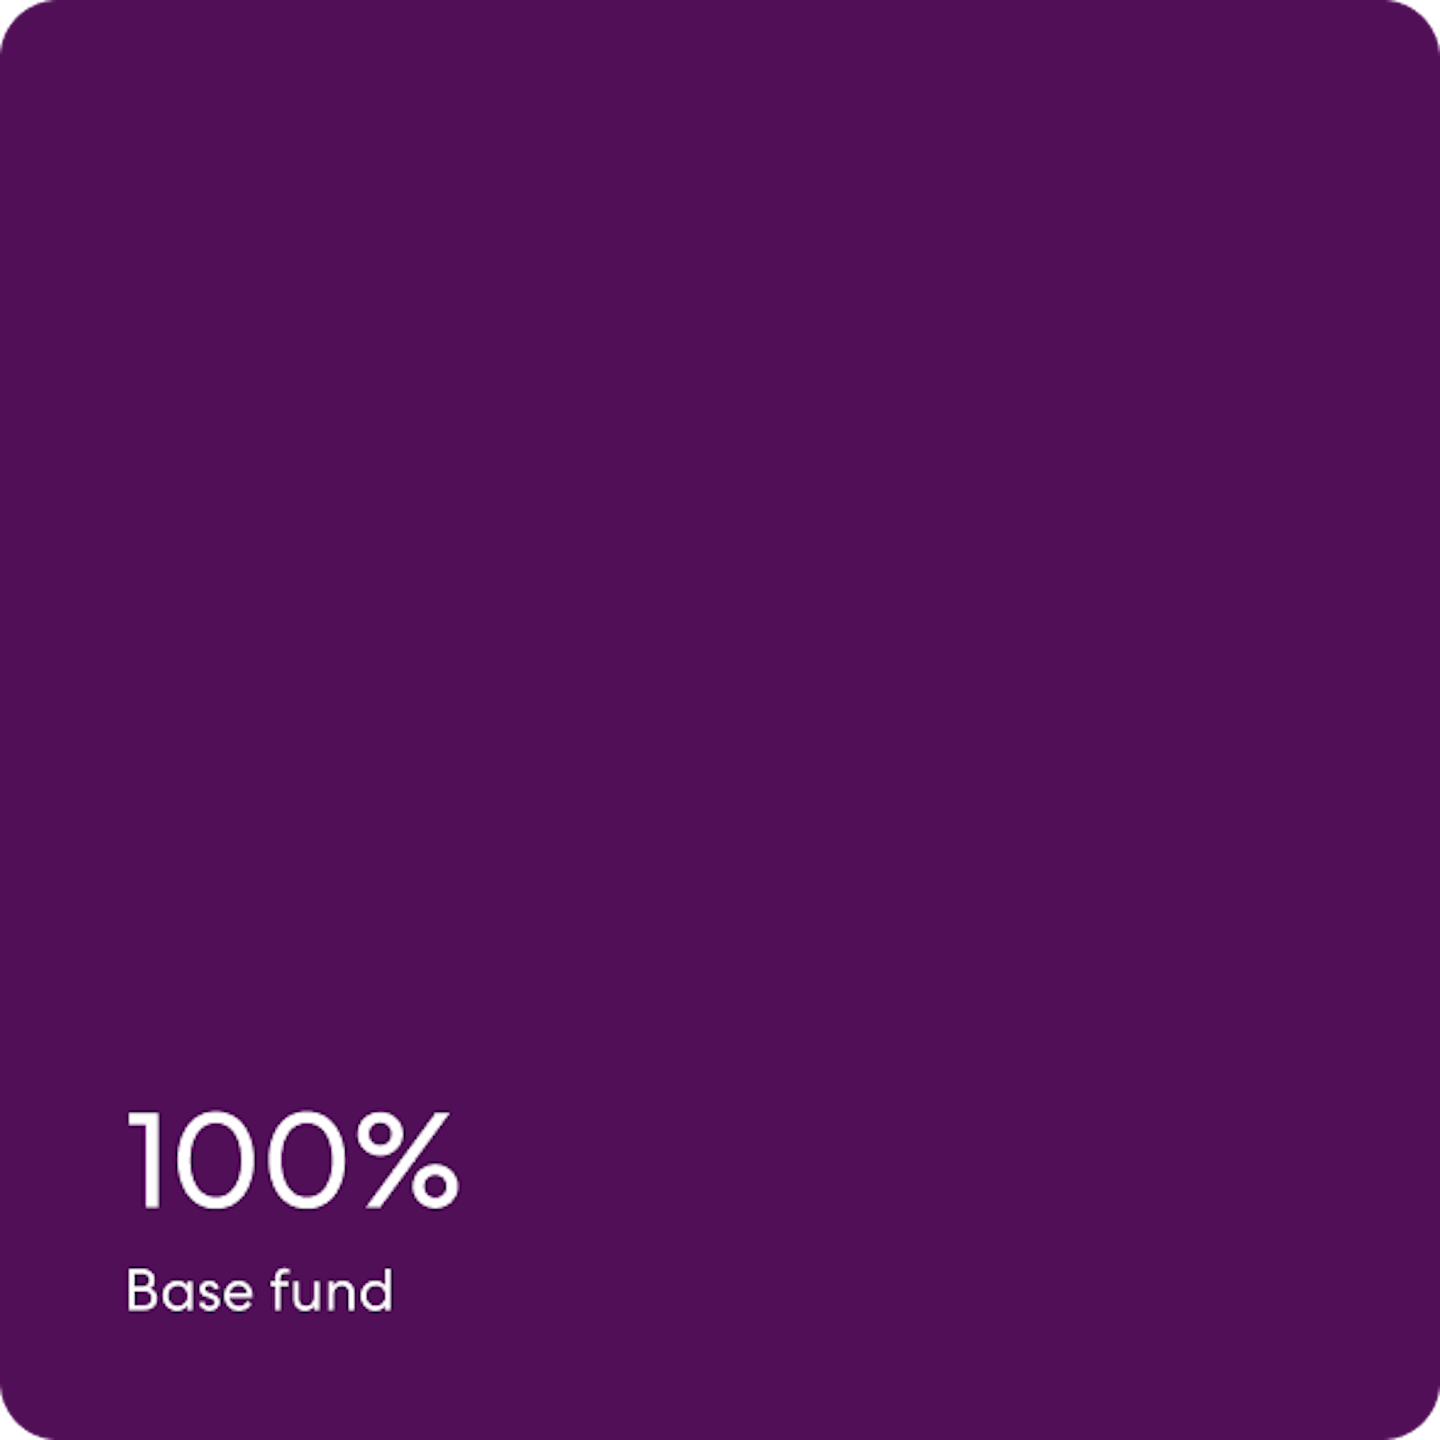 A purple square representing an investment plan with "100% Base fund" in the bottom left corner.